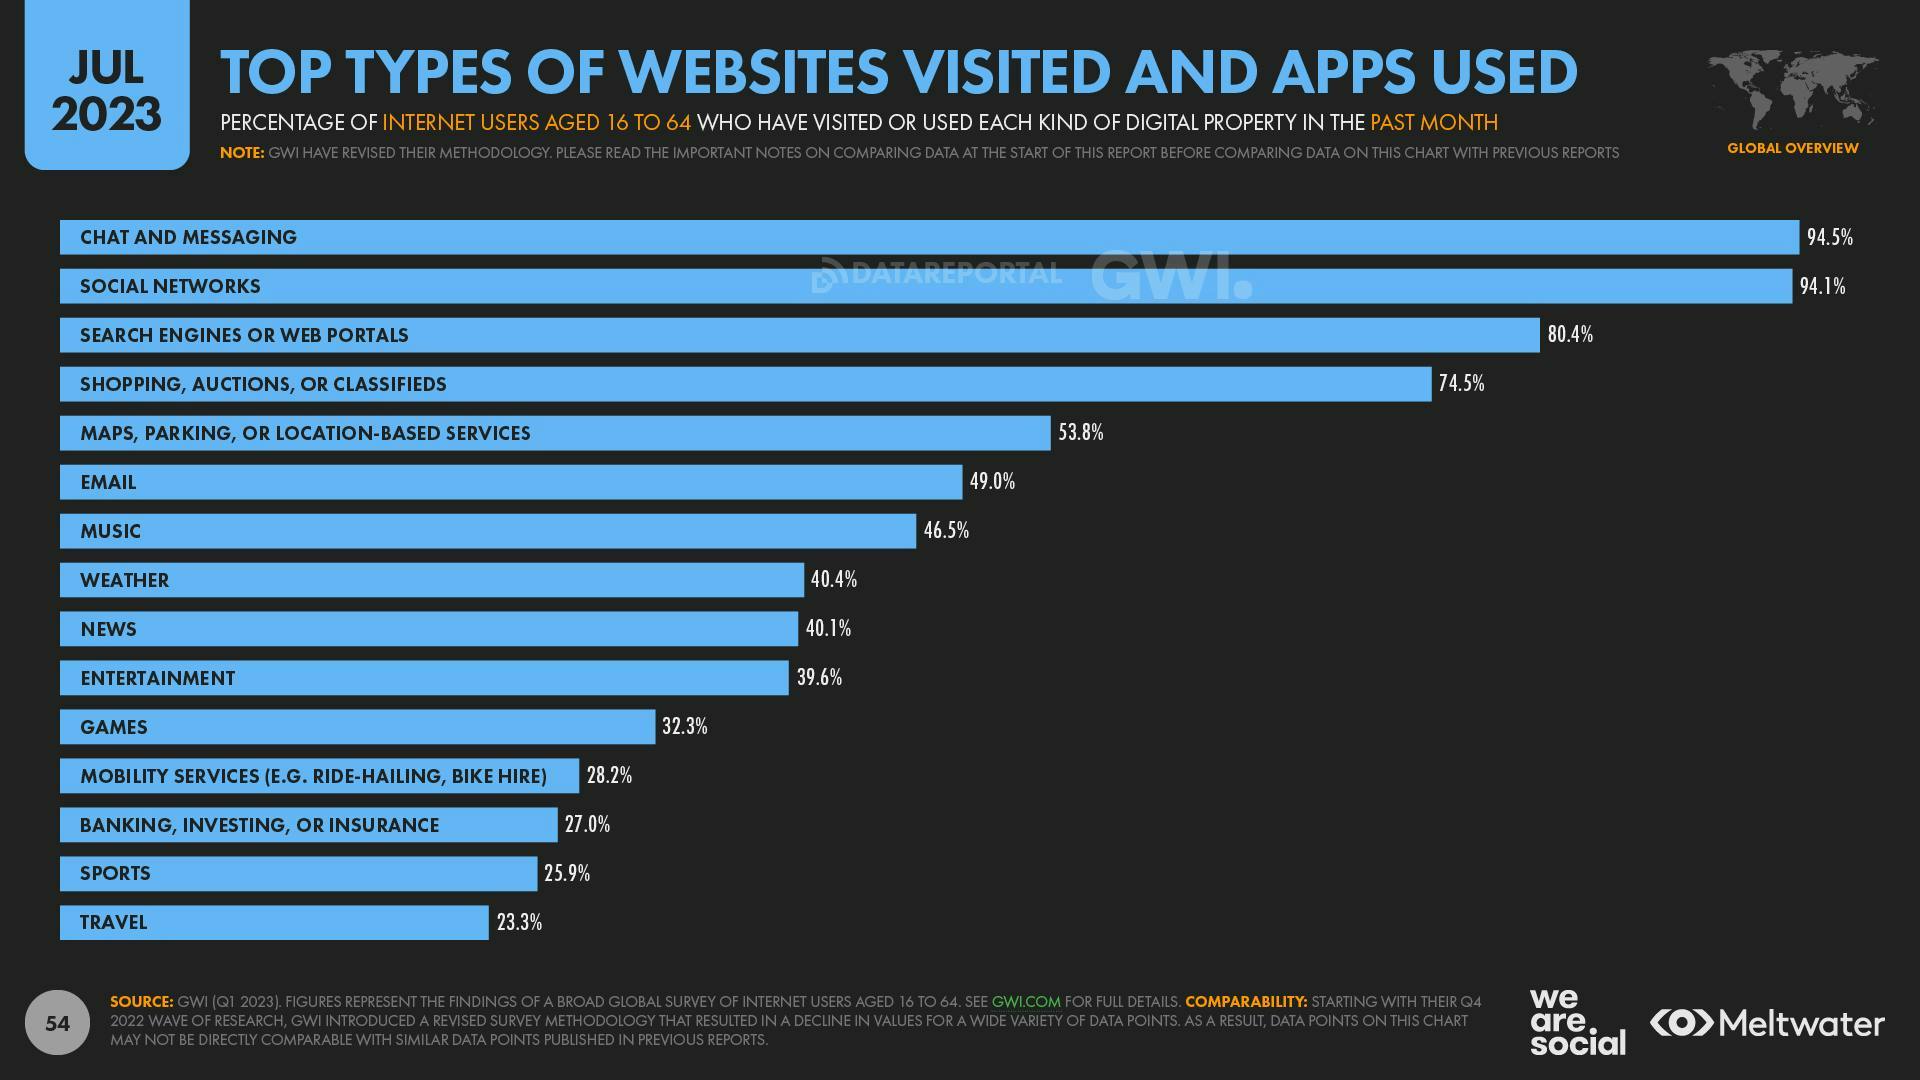 A bar chart showing the top types of websites visited and apps used over the past month, with chat and messaging topping the chart at 94.5% of internet users.